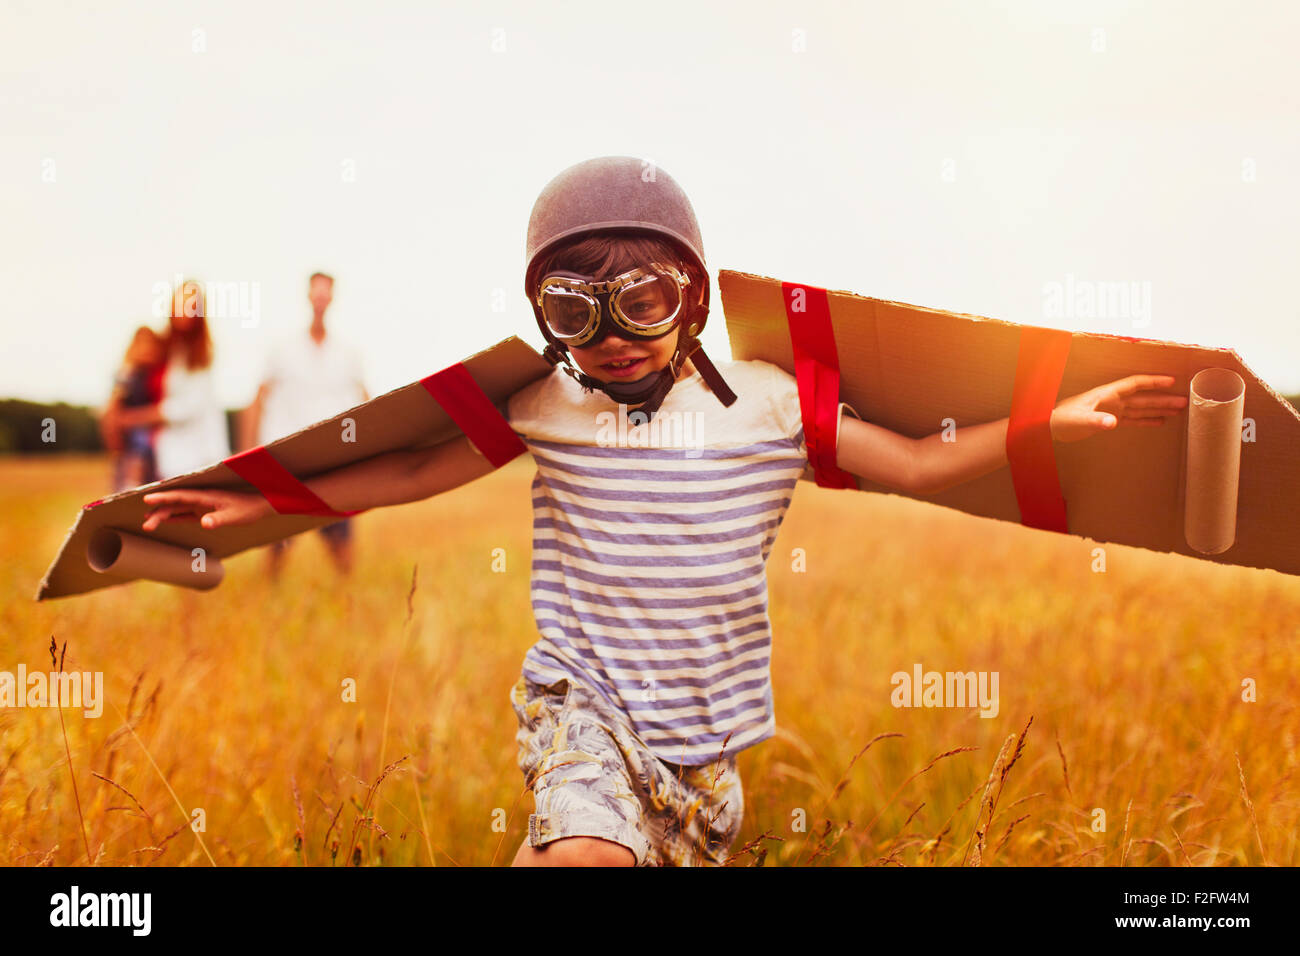 Boy with wings in aviator’s cap and flying goggles in field Stock Photo